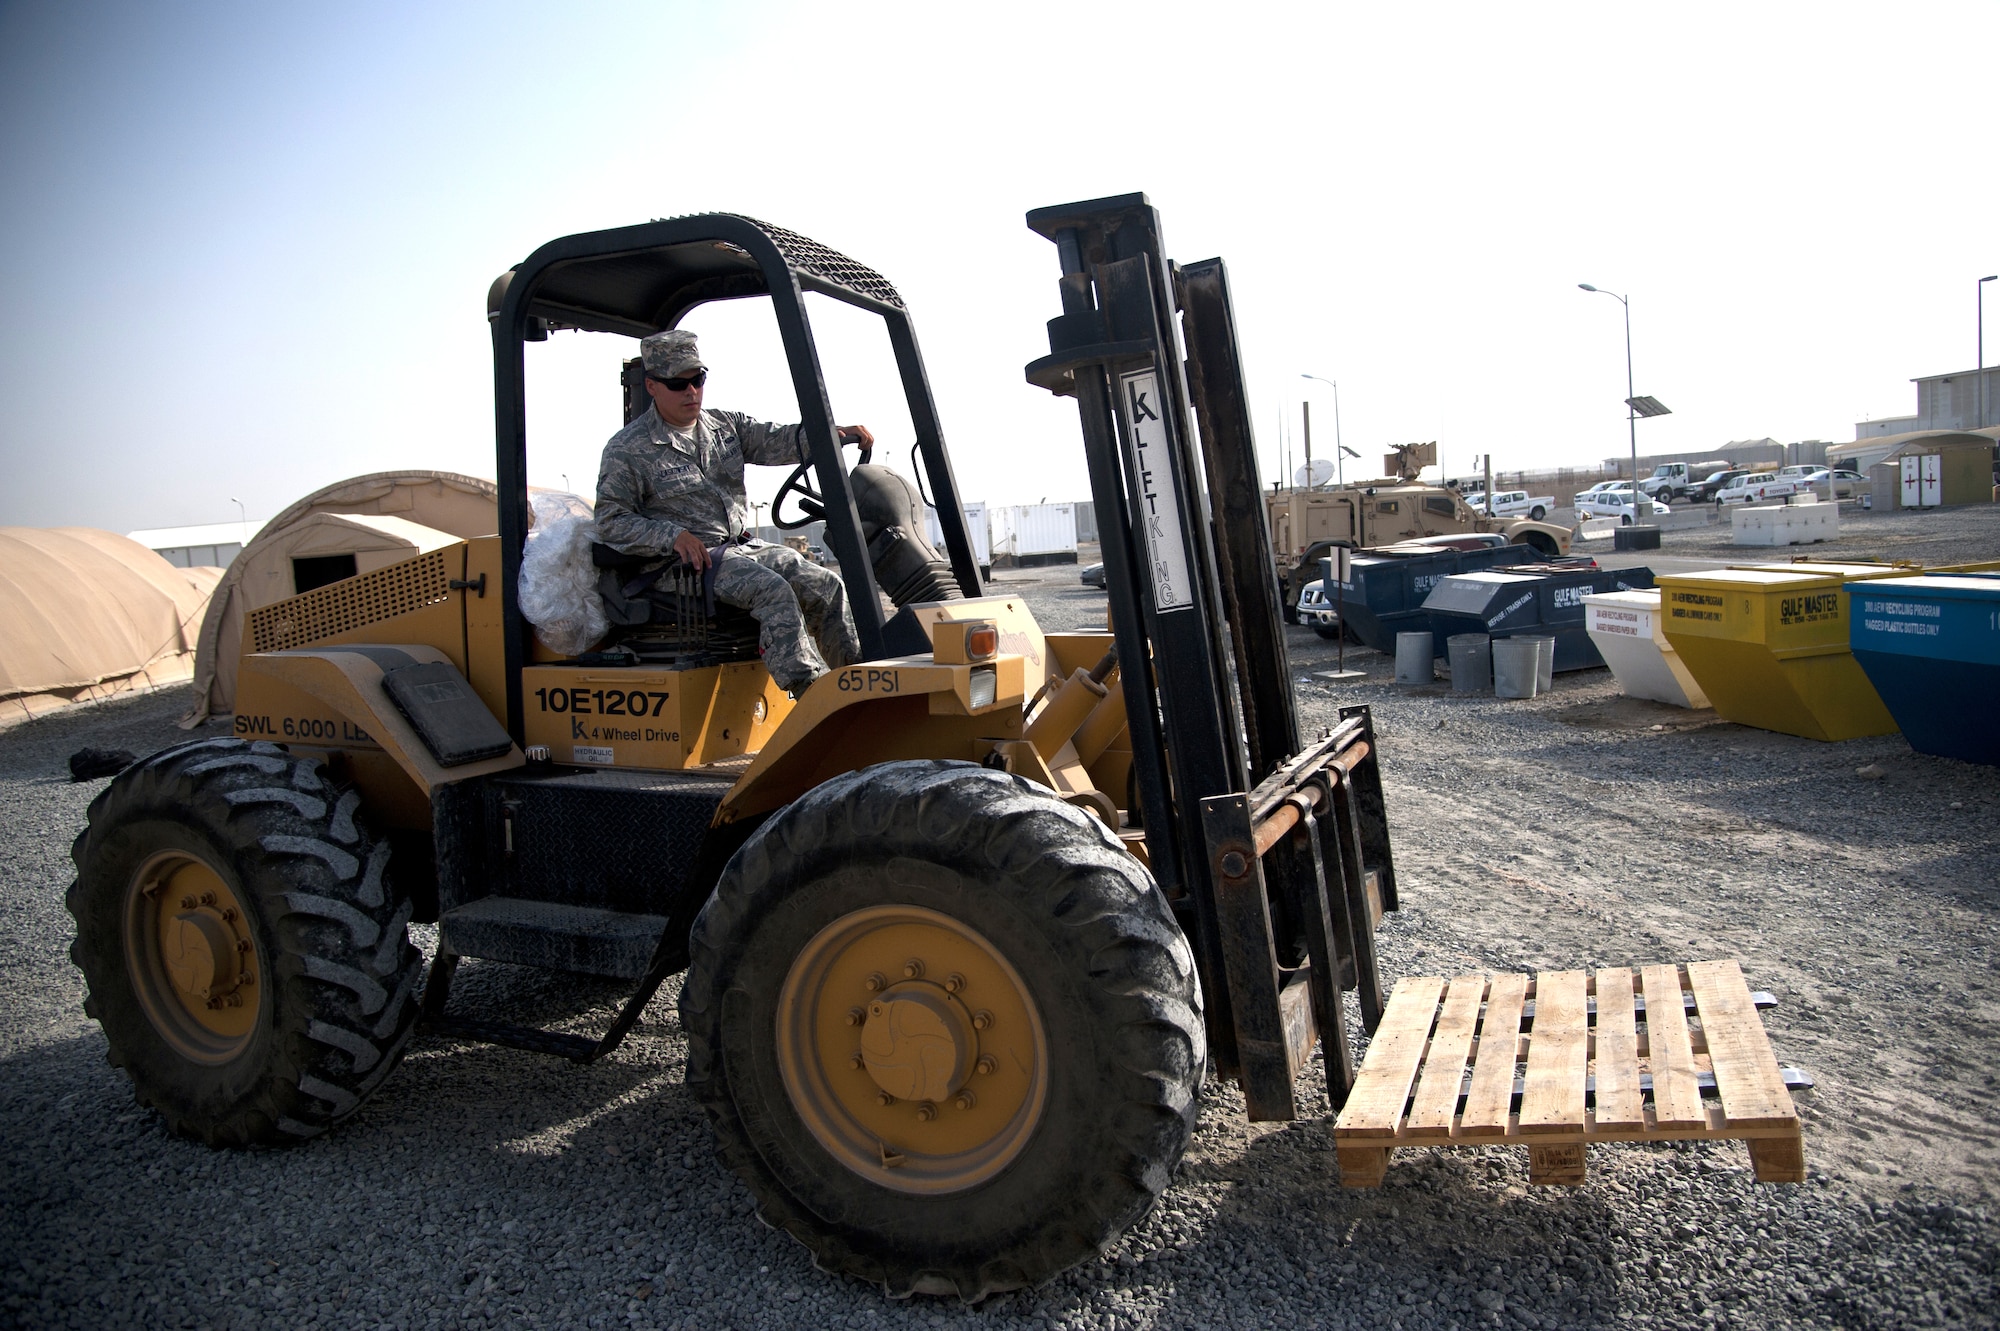 U.S. Air Force Airman 1st Class Mickey Laskowsky, 380th Expeditionary Force Support Squadron food services technician, drives his all-terrain 6K forklift to get more pallets of water for delivery at an undisclosed location in Southwest Asia July 3, 2013. Laskowsky is the main forklift operator for the 380th EFSS where he uses it to deliver water to 58 different stops a day. He is originally from Pittsburgh, Penn., and is stationed with the 171st Air Refueling Wing with the Pennsylvania Air National Guard. (U.S. Air Force photo by Senior Airman Jacob Morgan)